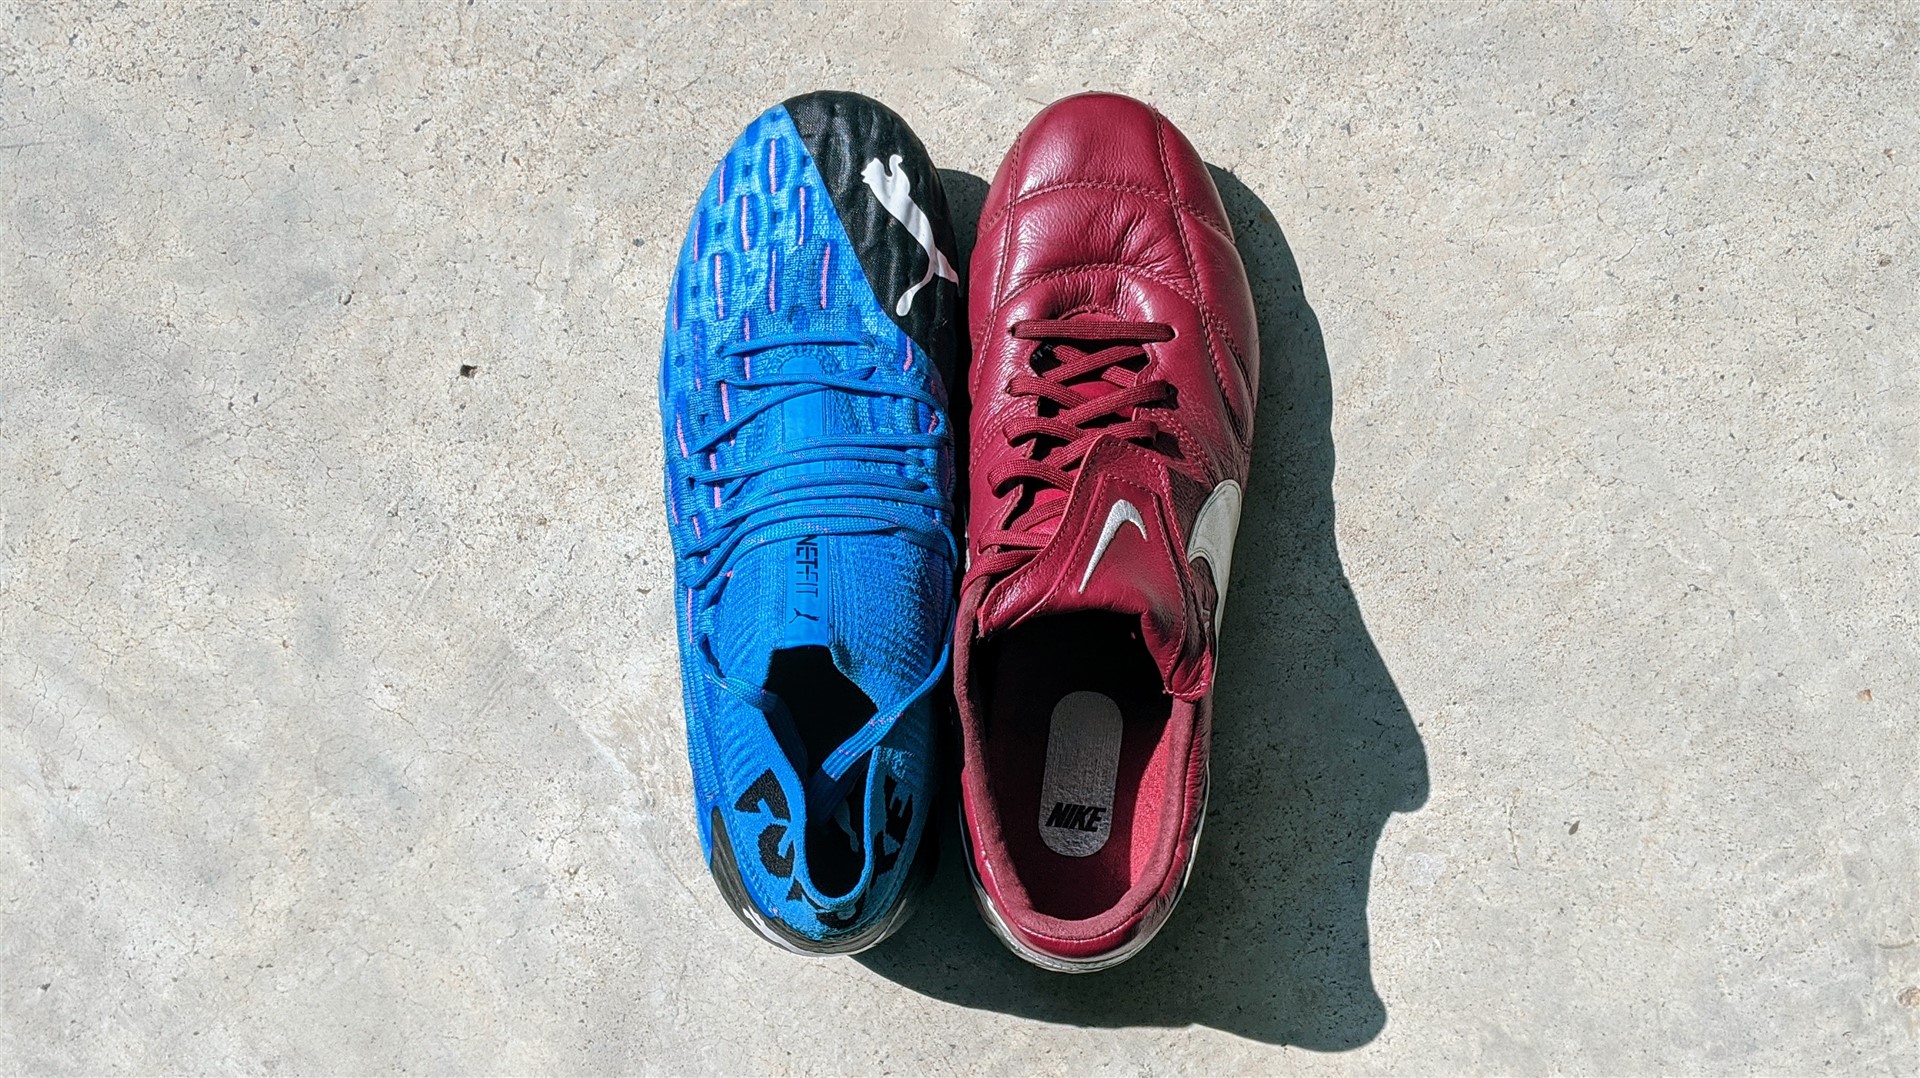 wide fit kids football boots